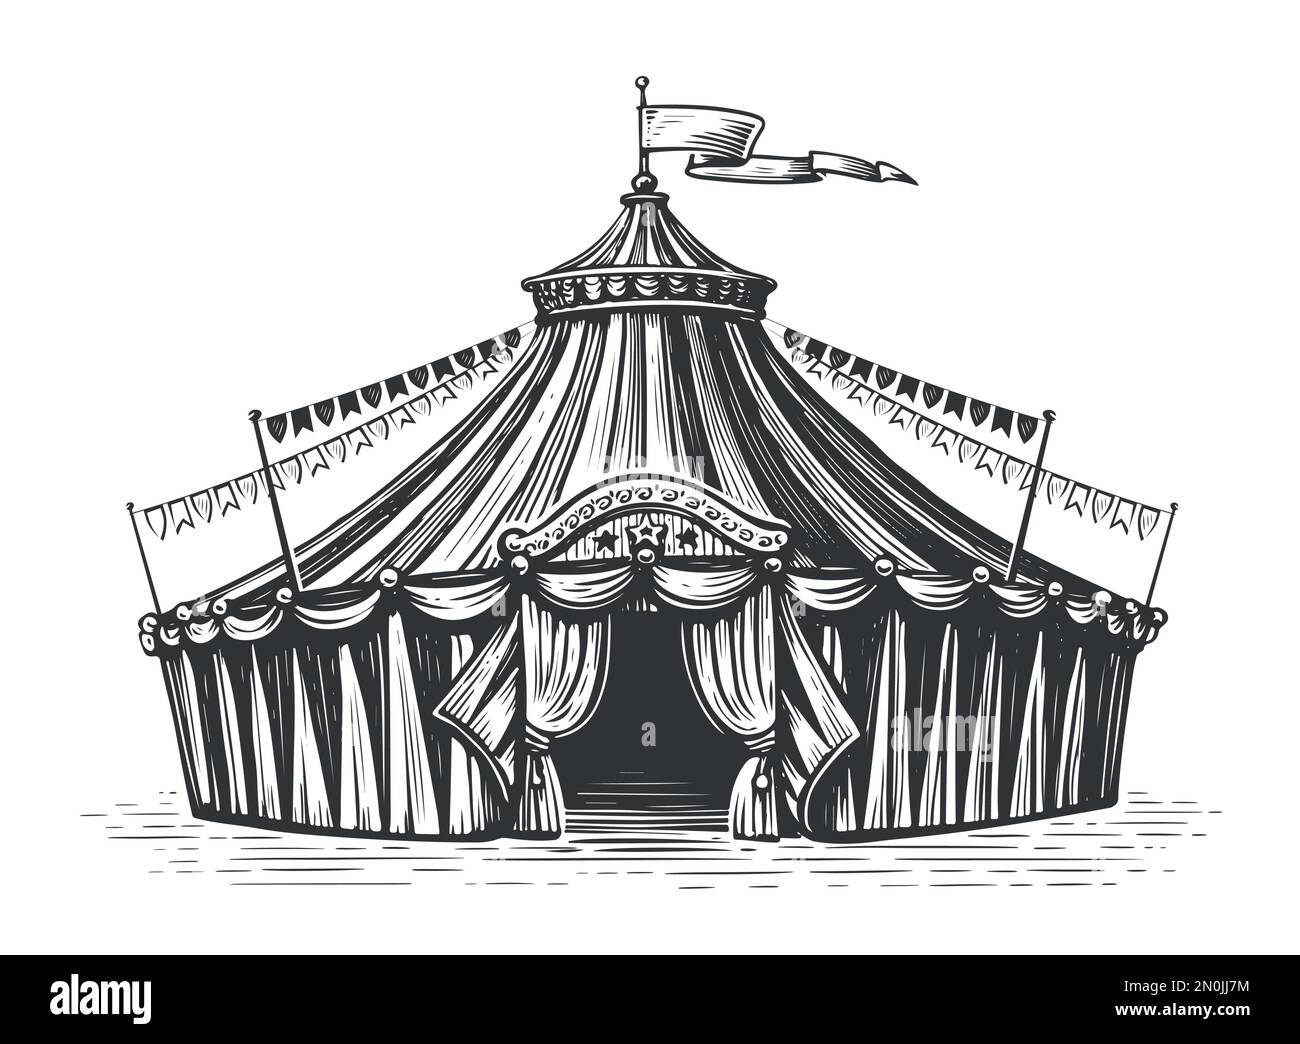 Circus tent illustration Black and White Stock Photos & Images - Alamy